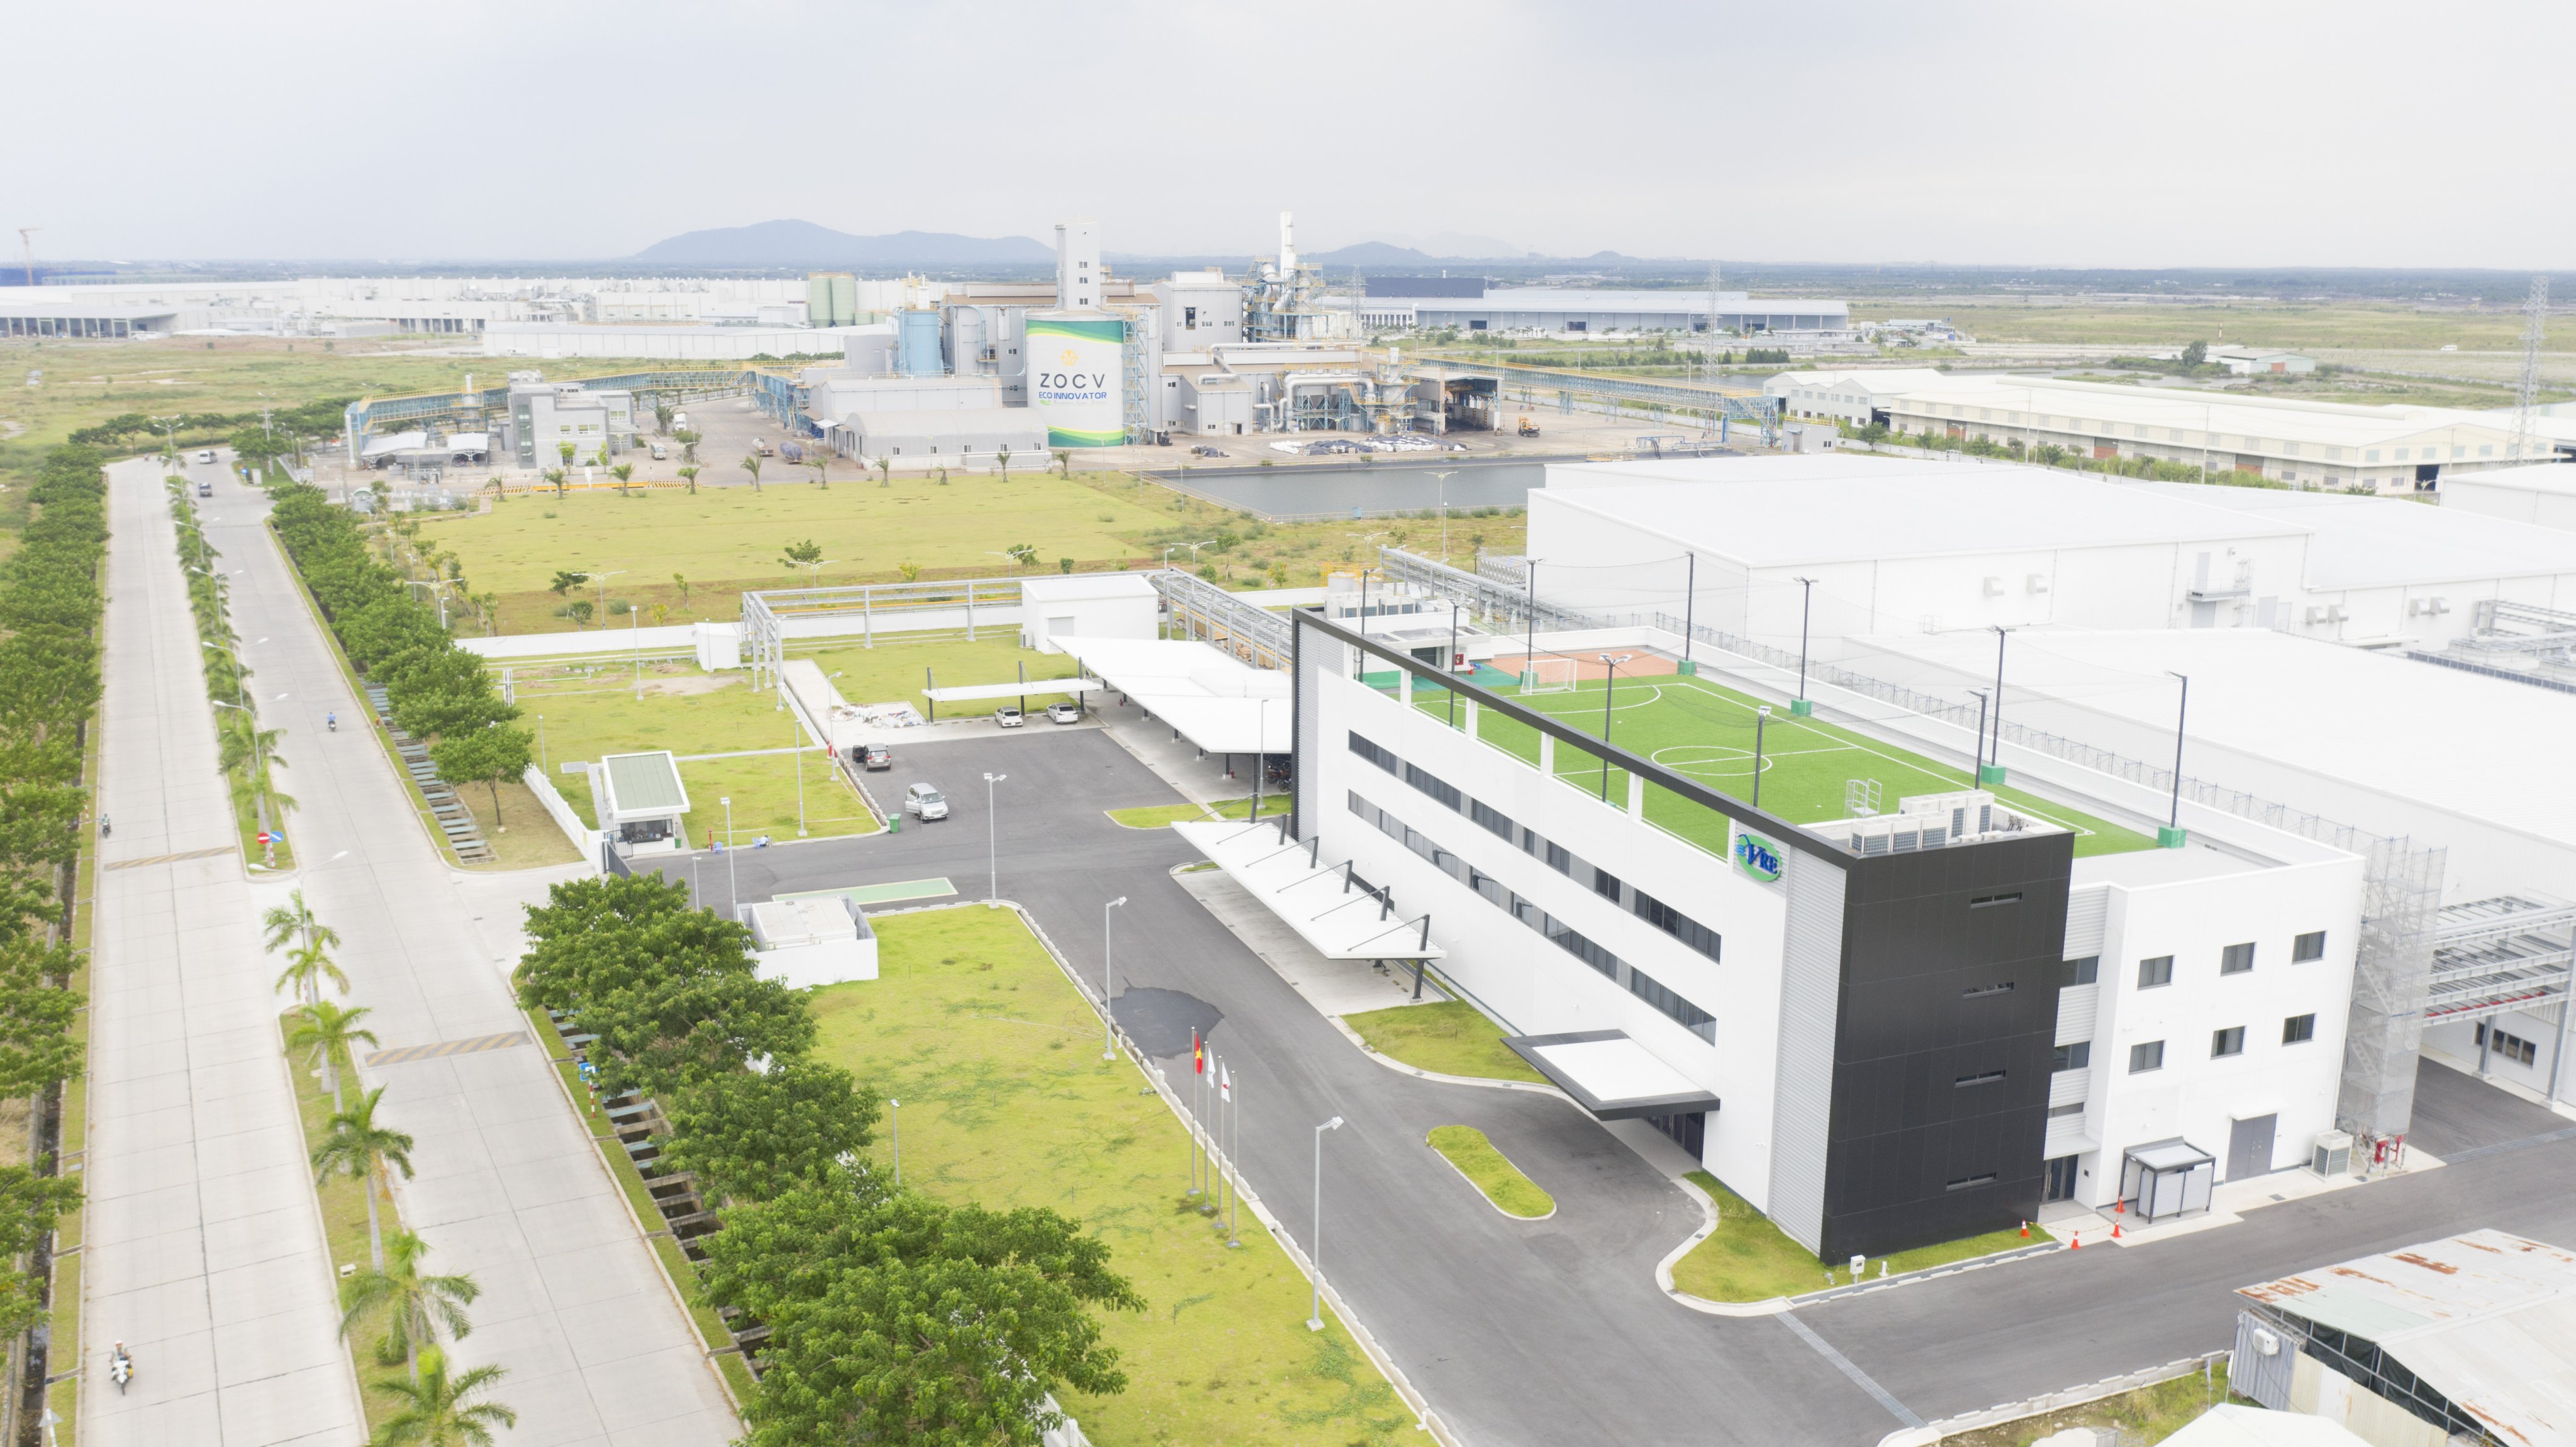 Investment in industrial parks, Ba Ria – Vung Tau real estate benefited greatly